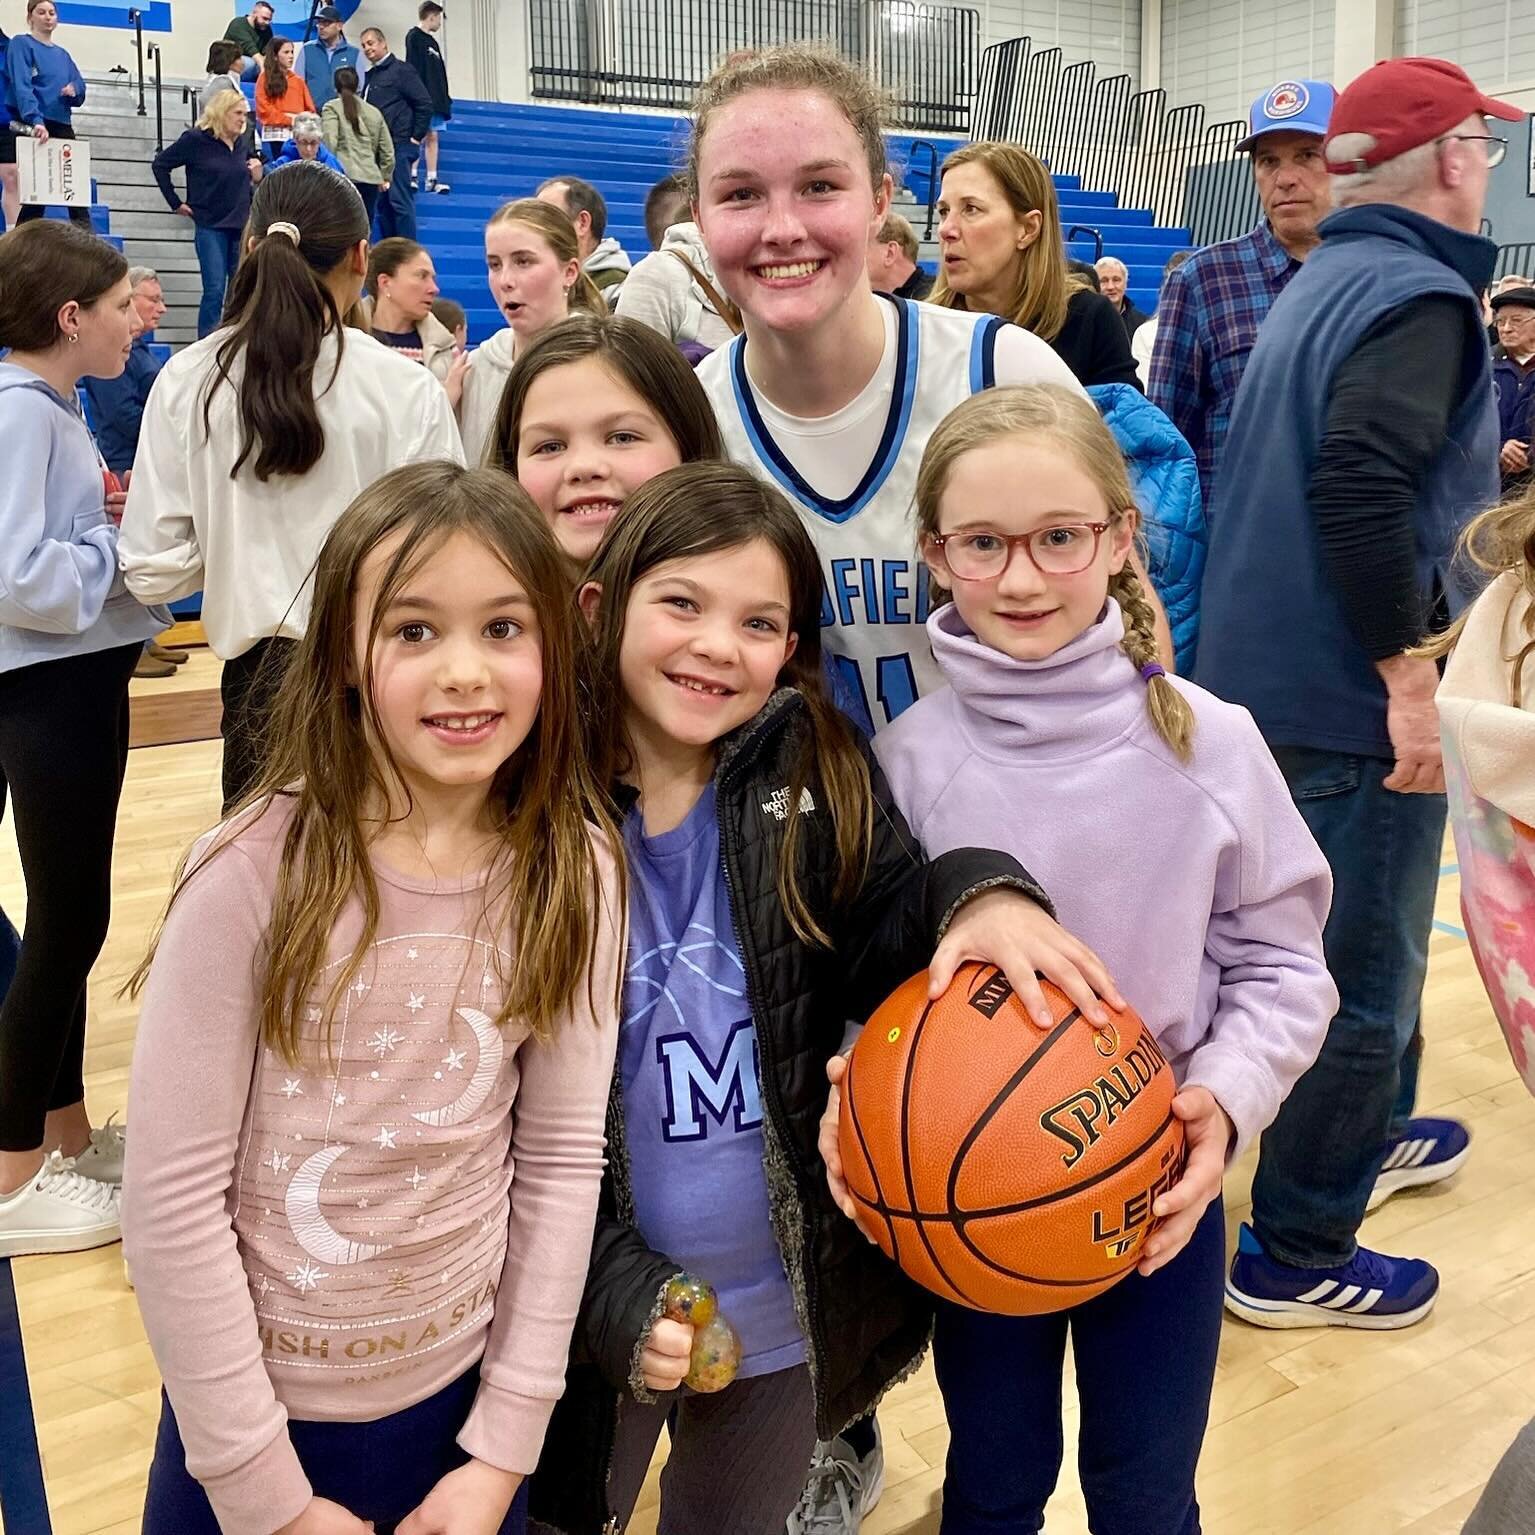 Sadie Cumming, parishioner and Medfield&rsquo;s Girls&rsquo; Basketball Captain, helped lead the Medfield Warriors to a victory over Norwood in the Division 2 Girls&rsquo; Basketball Quarterfinal. Sadie scored 12 points, while younger parishioners Ma